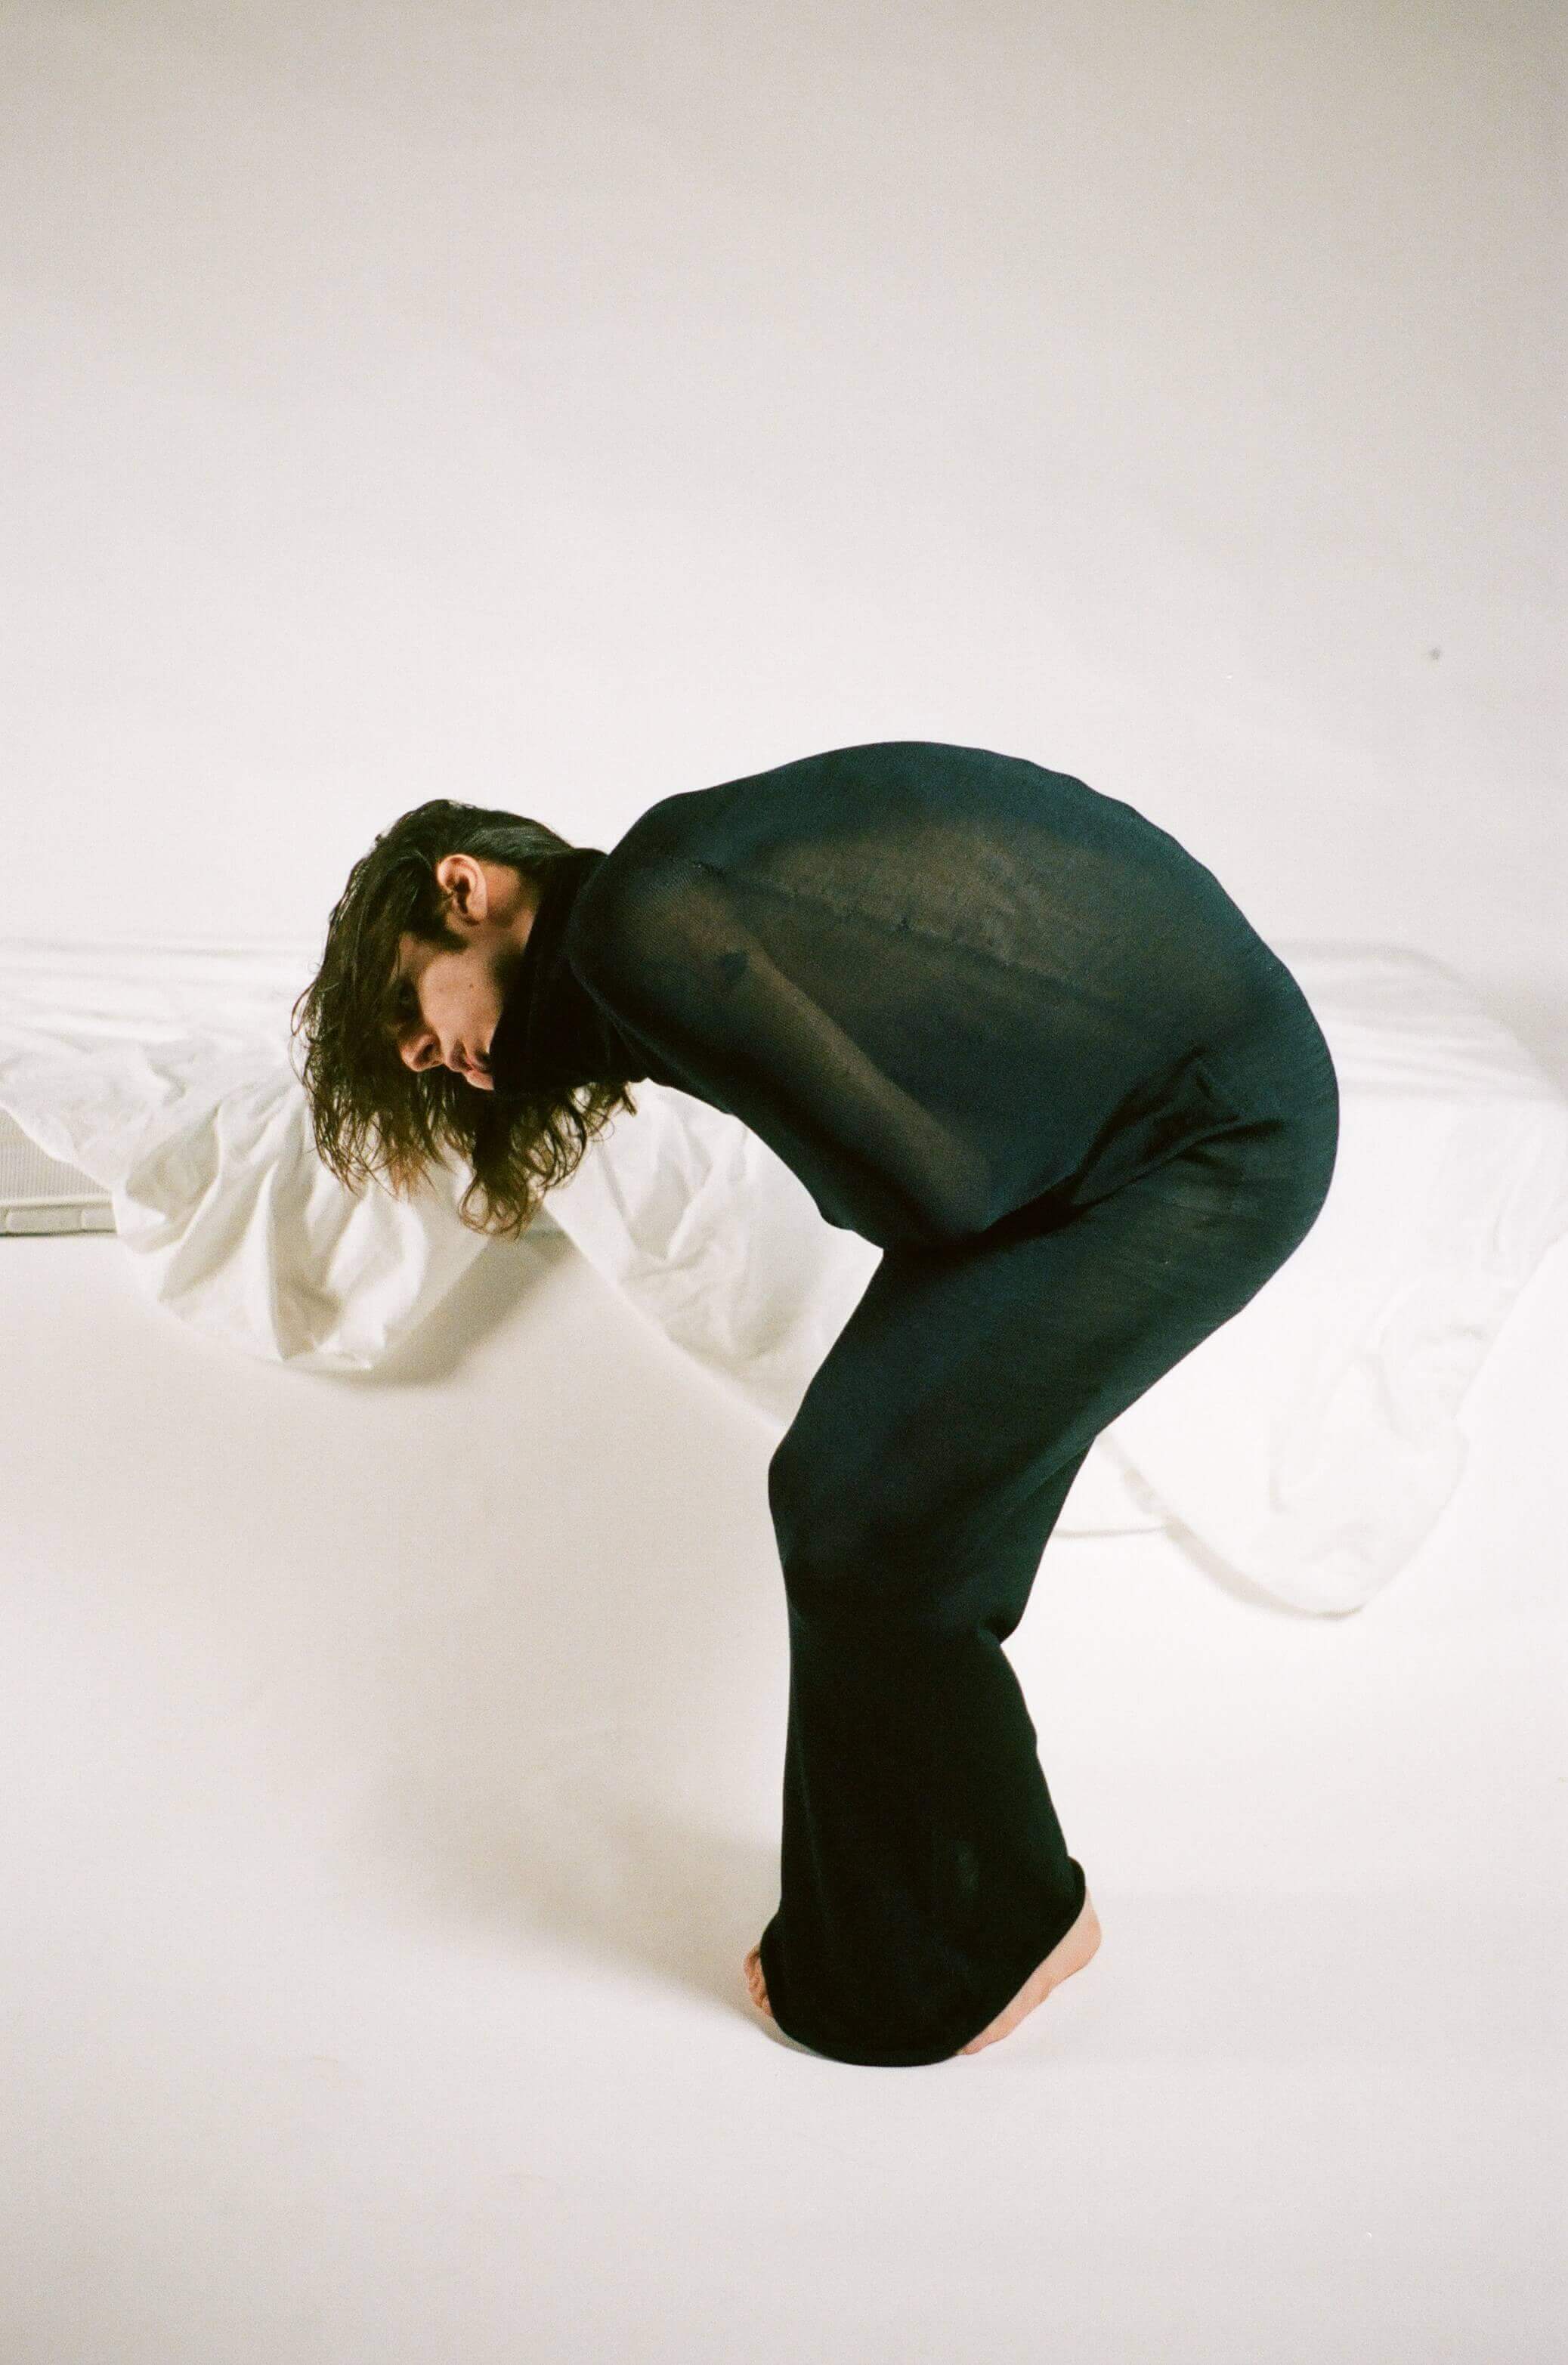 Model wrapped in semi transparent black cloth, bent over in an almost foetal position. White background and bed behind him